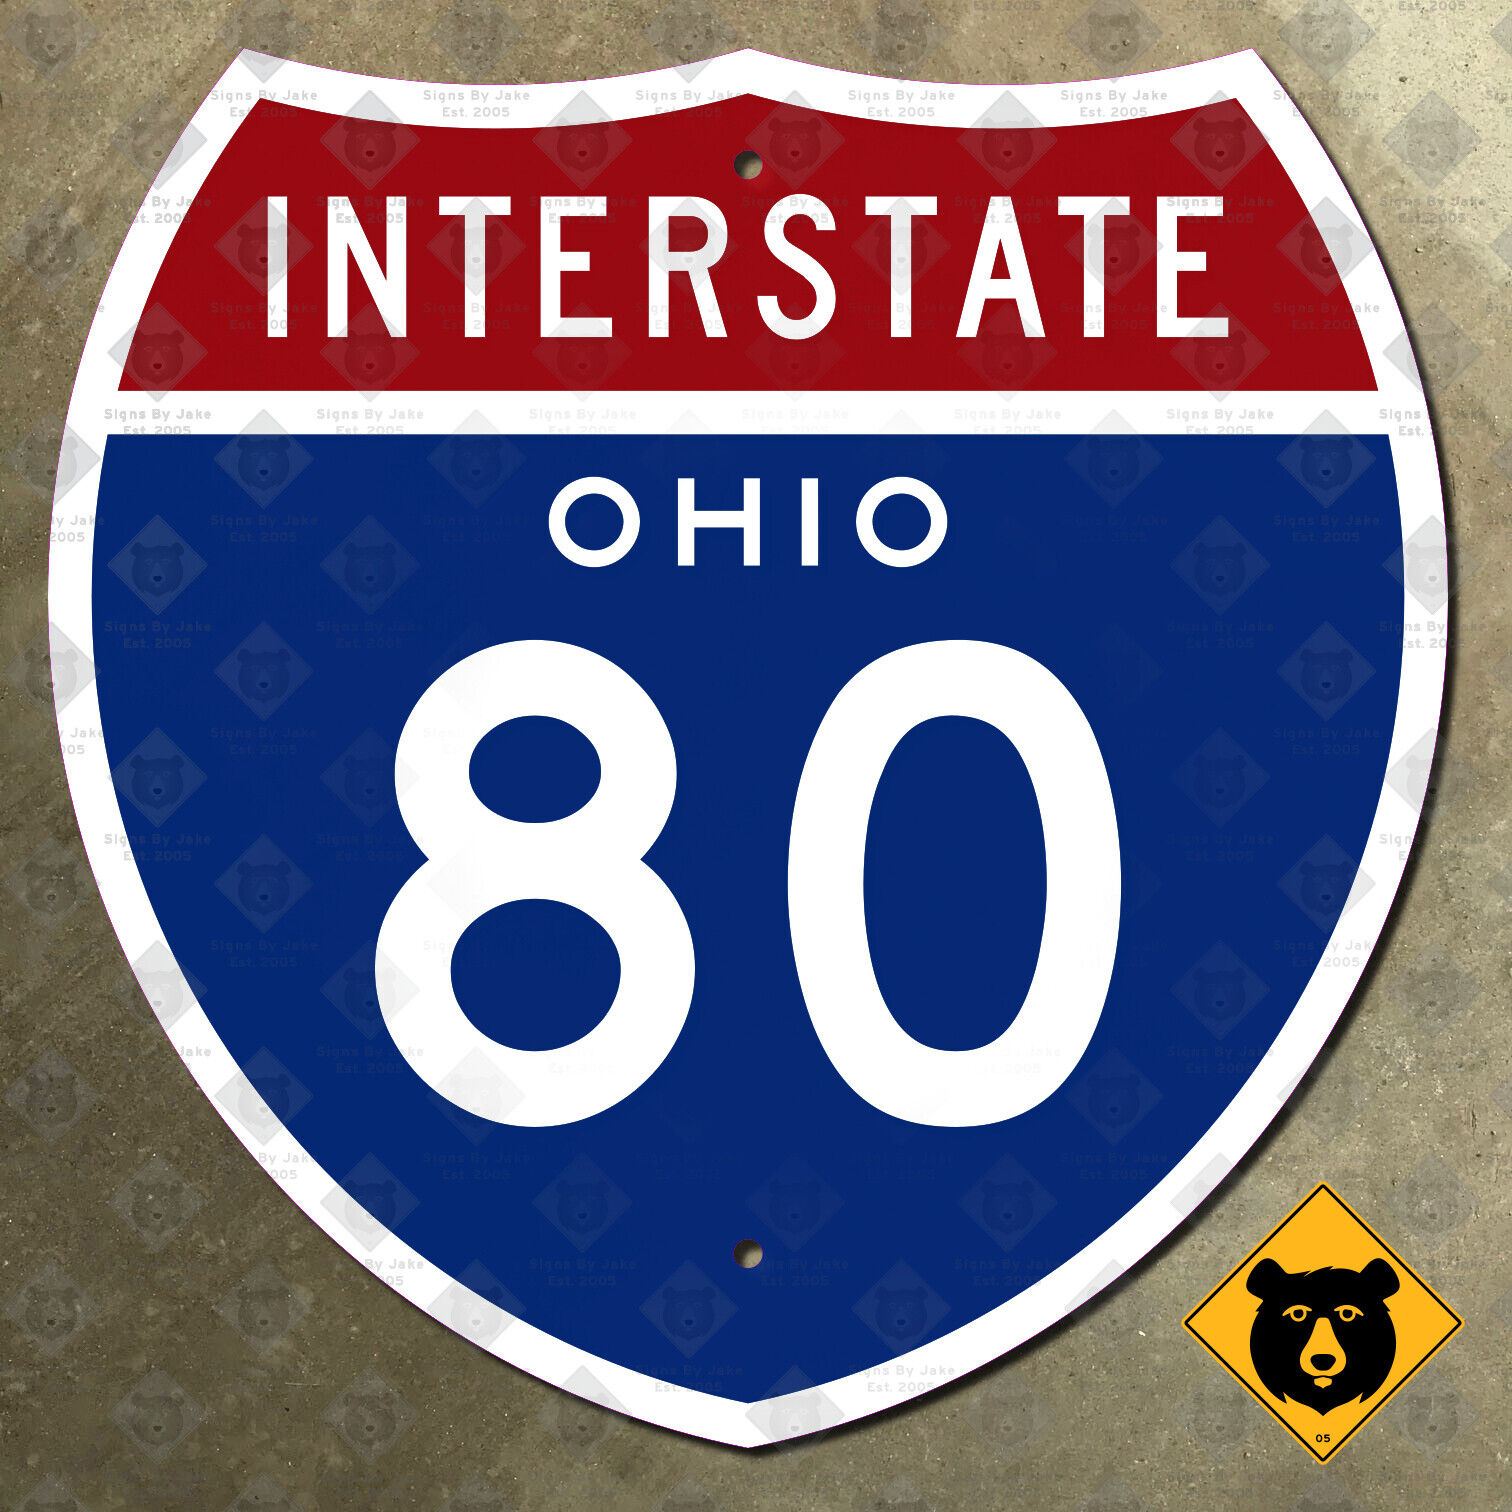 Ohio Interstate 80 route marker 1957 northern state highway sign 12x12